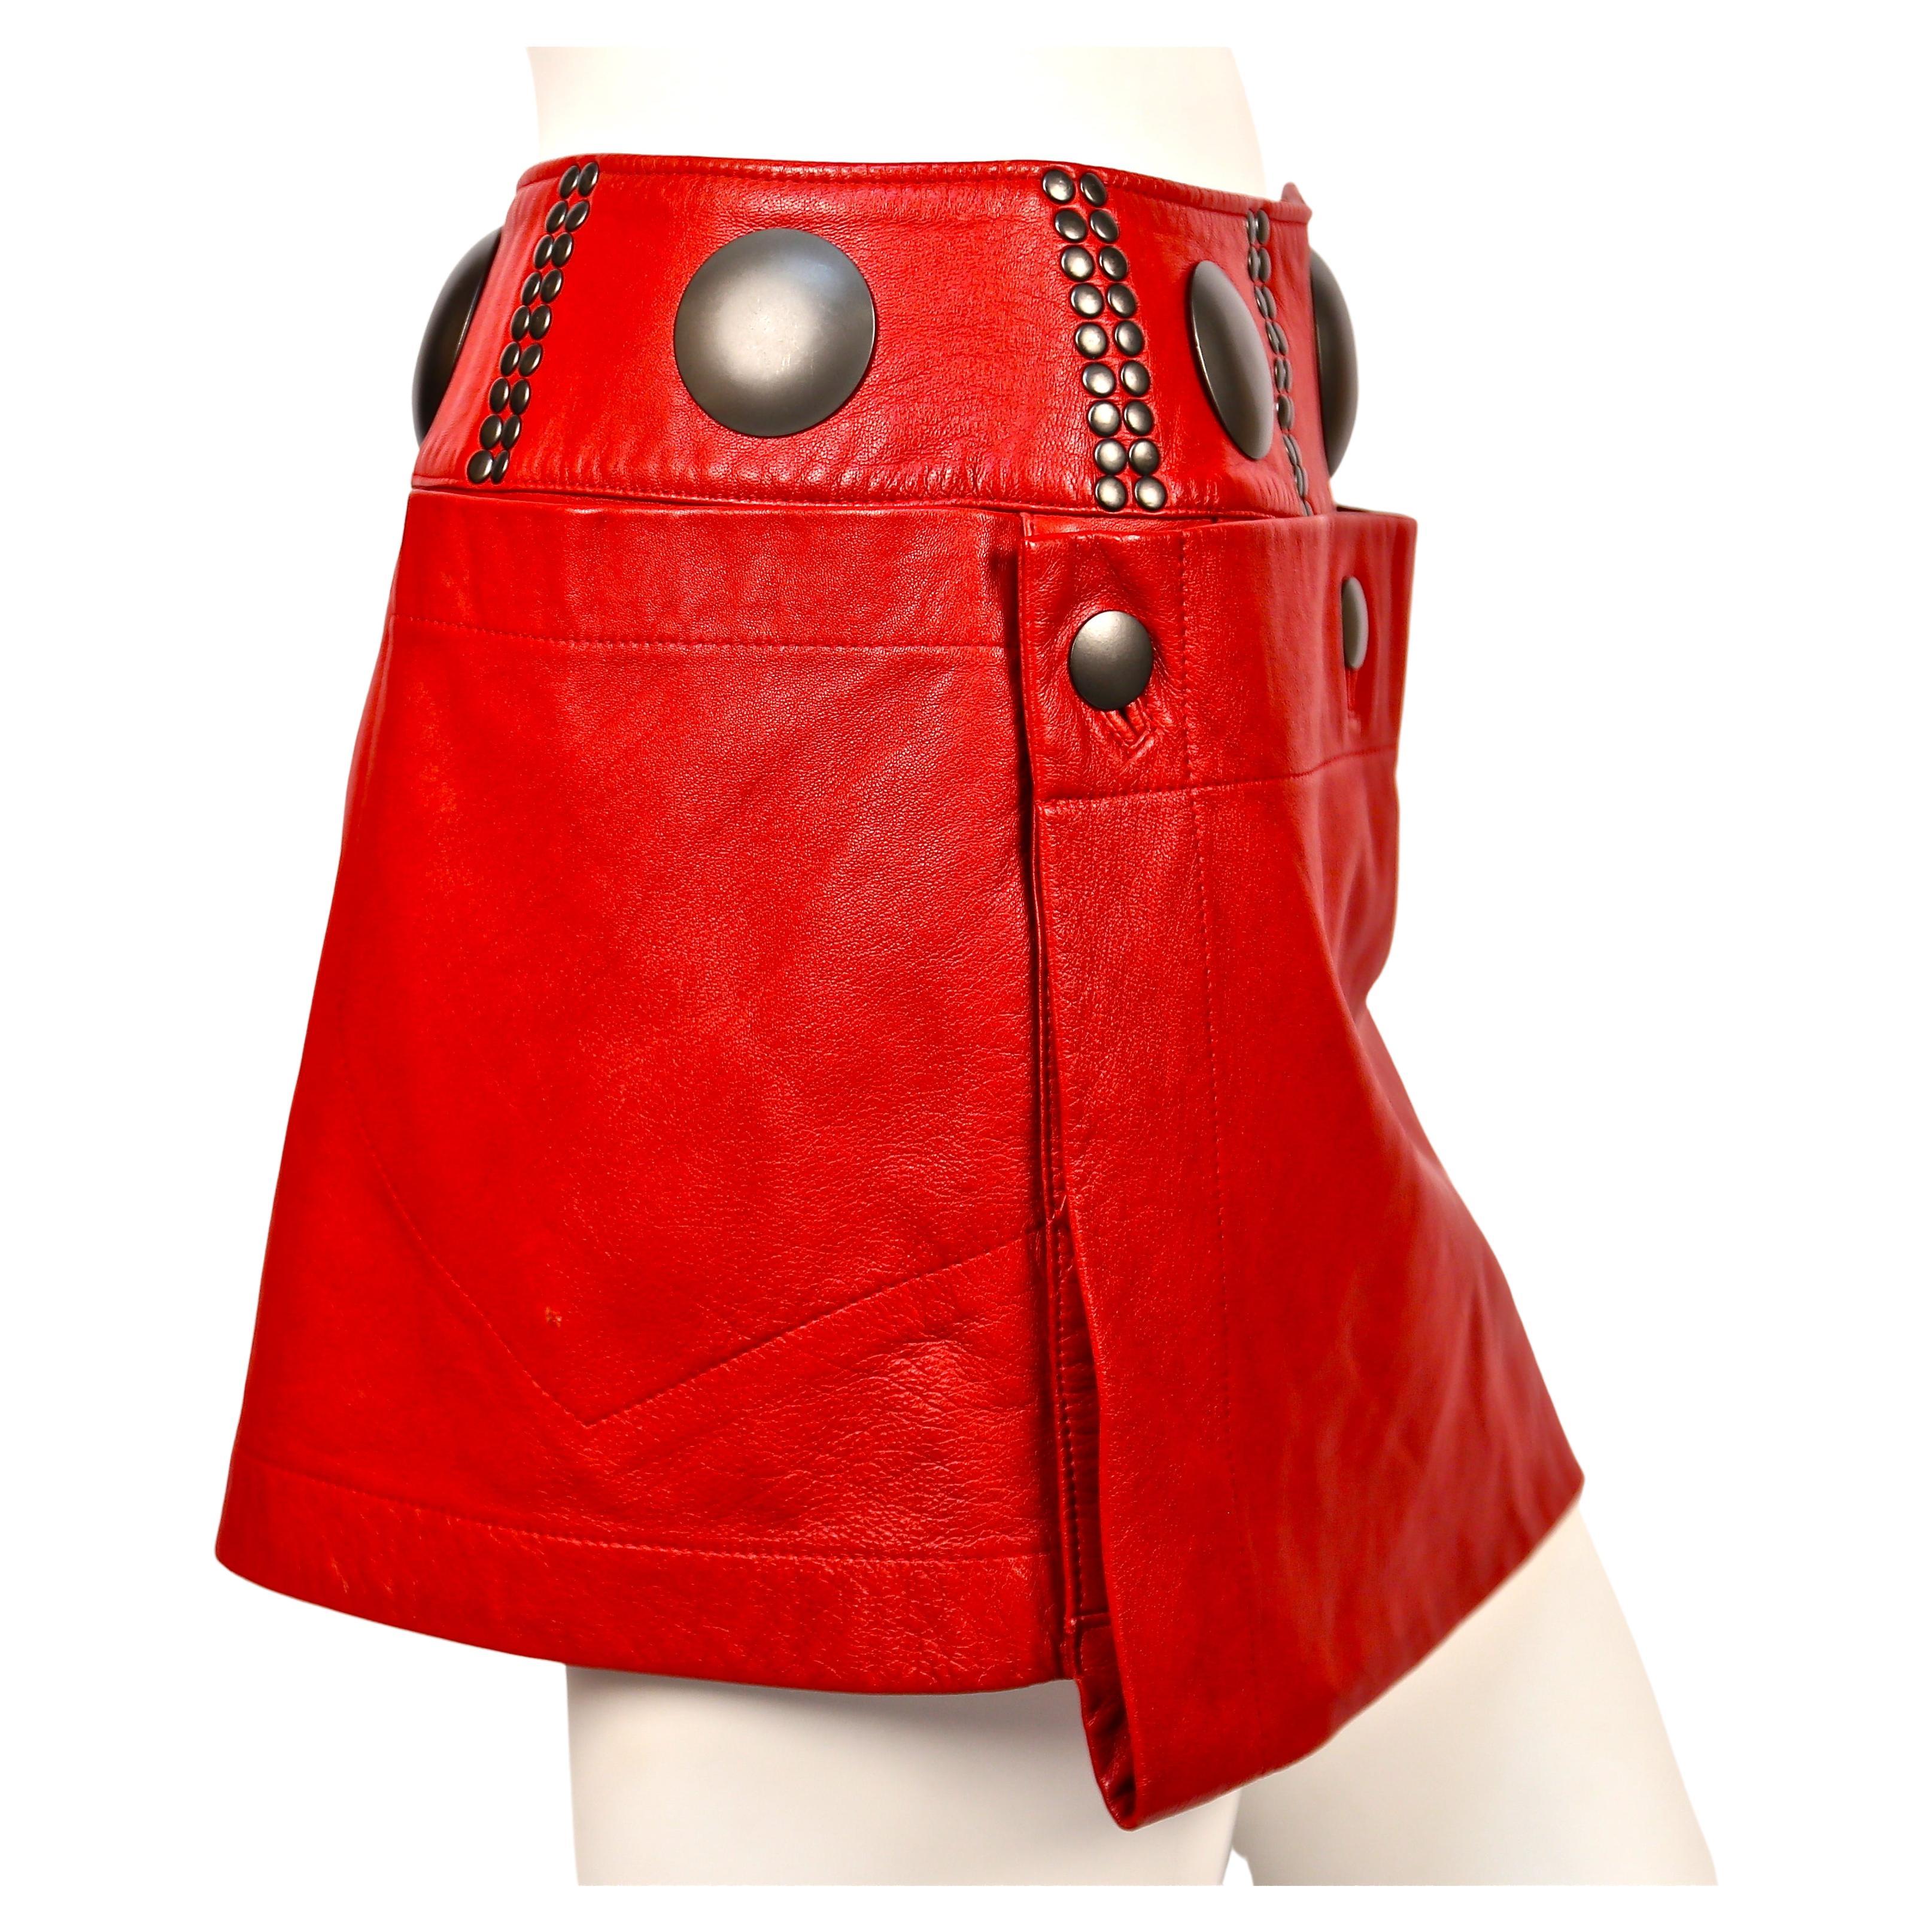 Vivid red leather mini skirt with oversized gunmetal studs from Issey Miyake dating to the 1980's. Labeled a size medium however this skirt best fits a size small or medium. Approximate measurements: 28